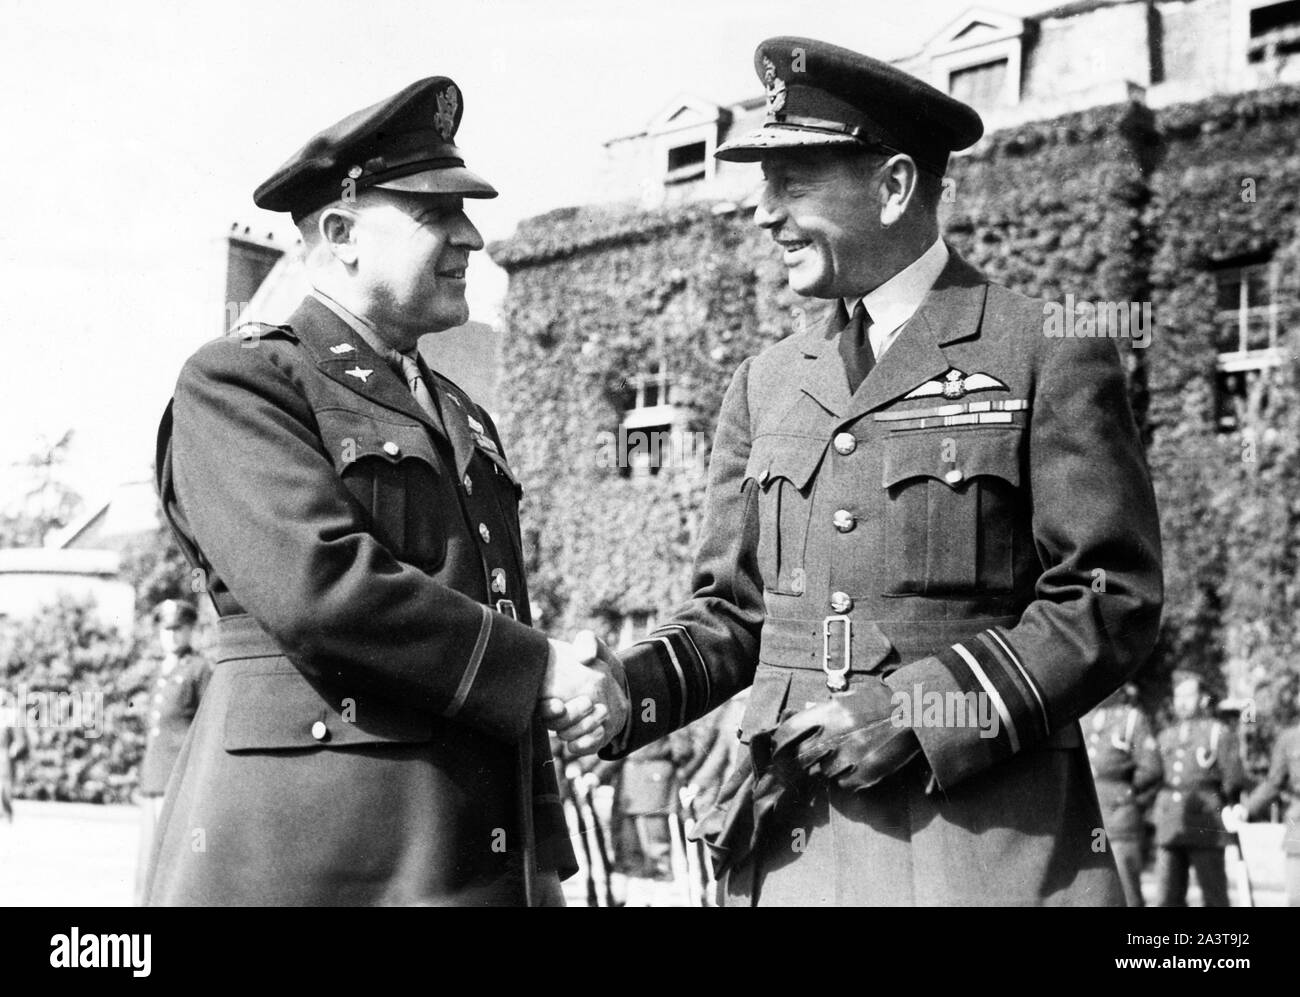 Photo Must Be Credited ©Alpha Press 050000 22/06/1943 A formal ceremony ...